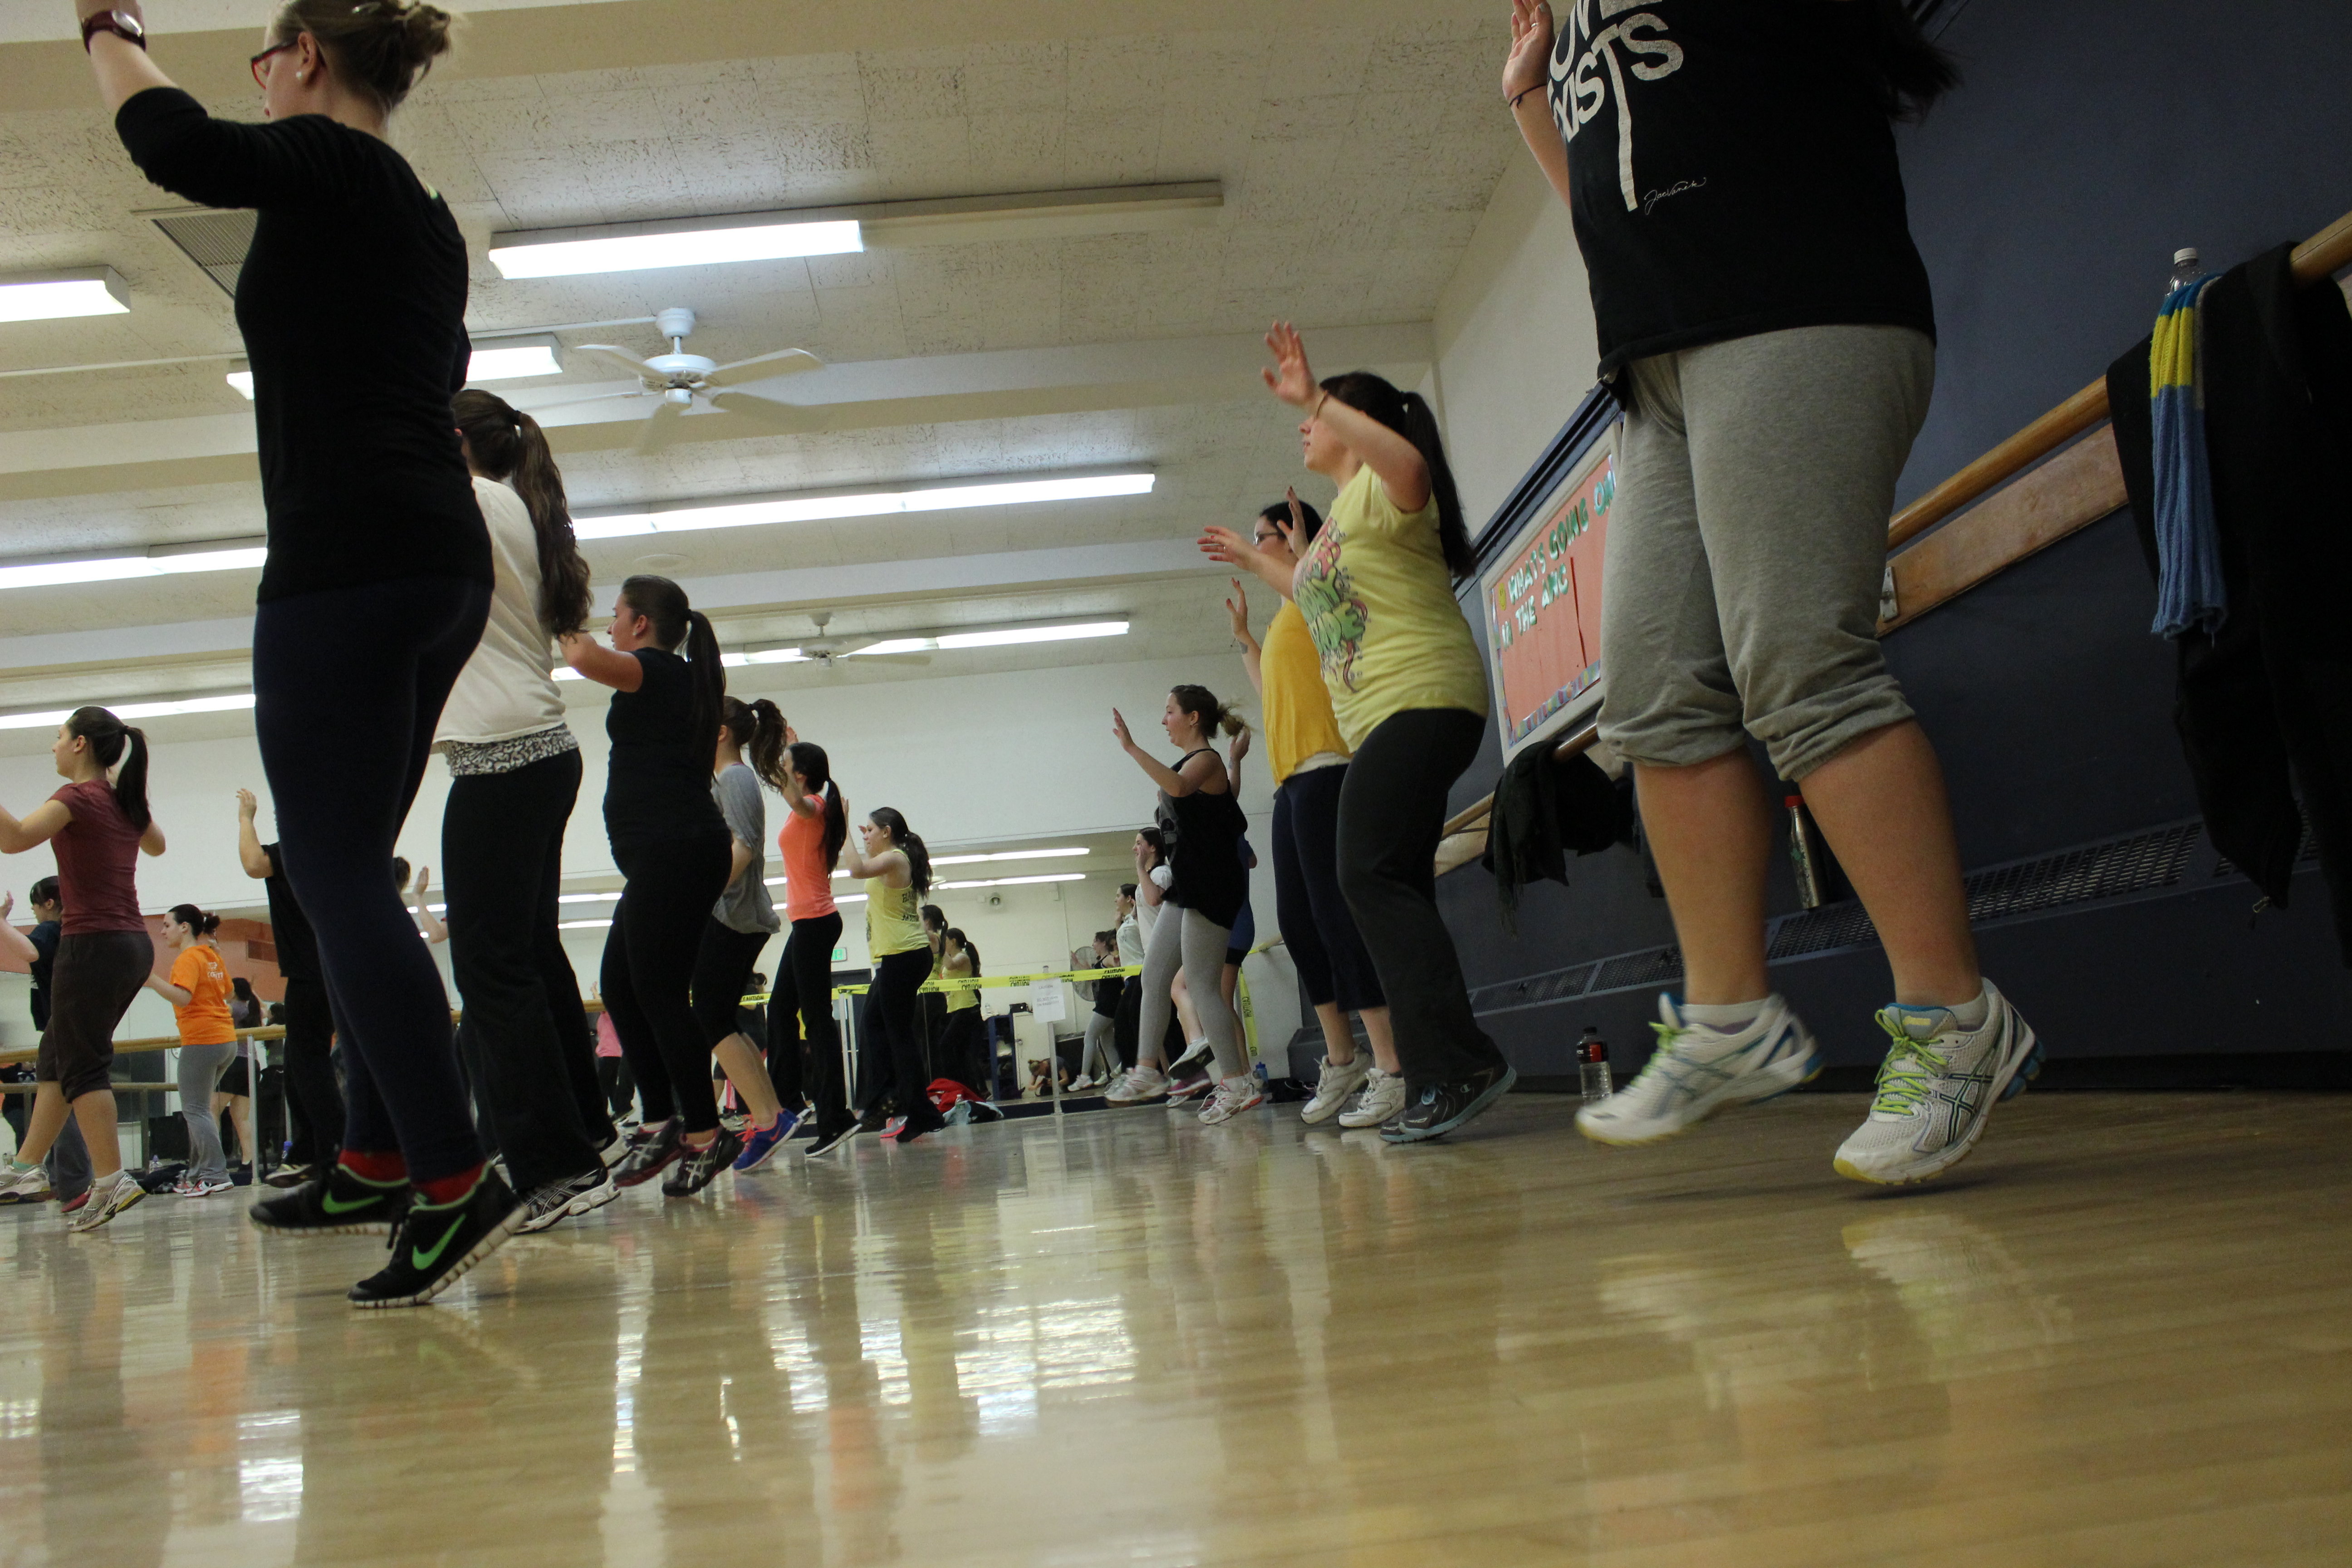 SUNY New Paltz Joins Group Exercise Trends